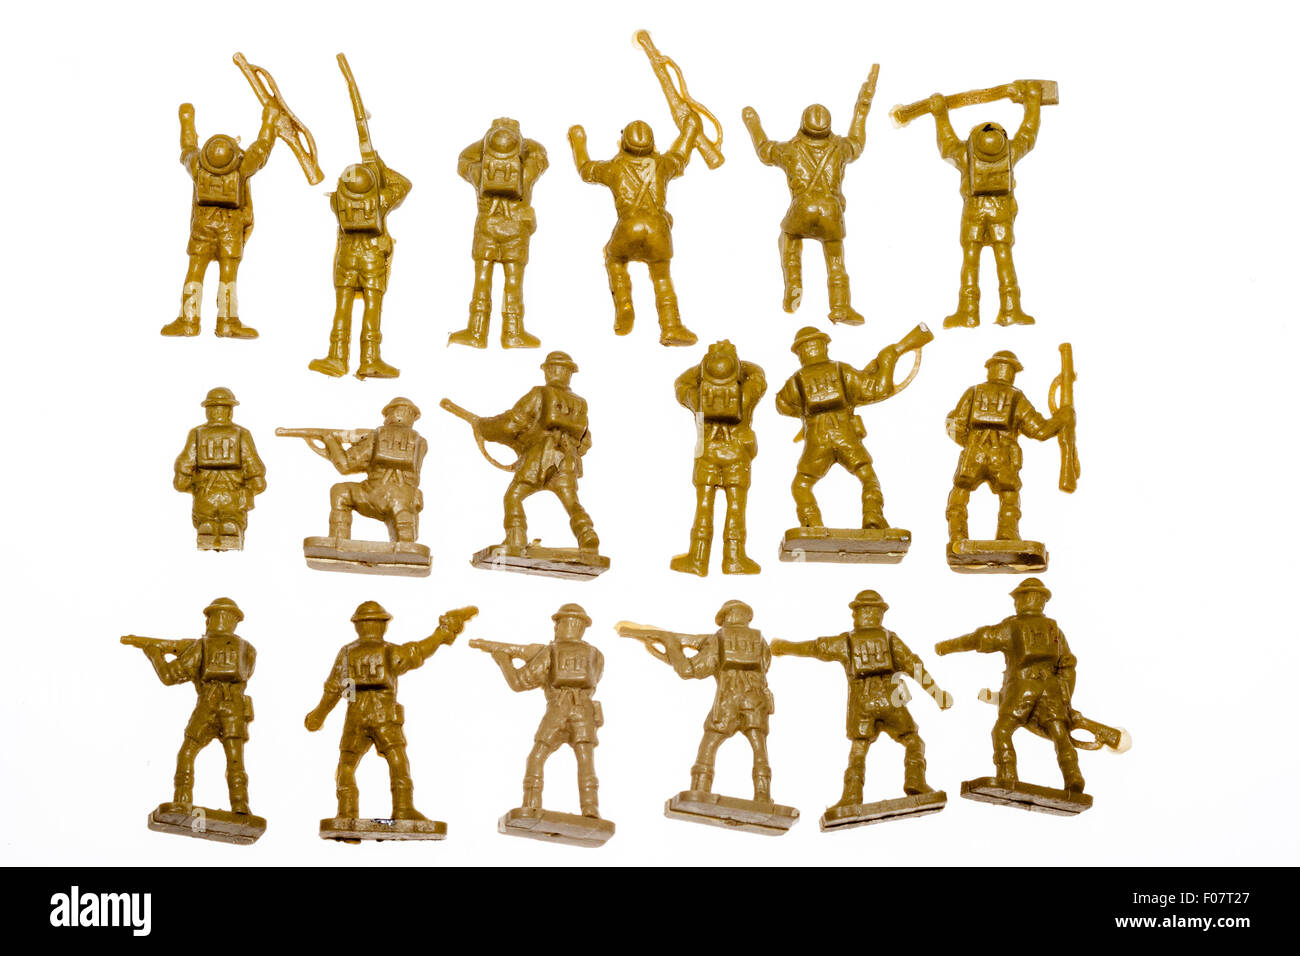 Airfix, HO/OO, 1/72 scale plastic model figures. World War Two, 8th army. Three rows of soldiers on plain white background. 1960 original set. Stock Photo